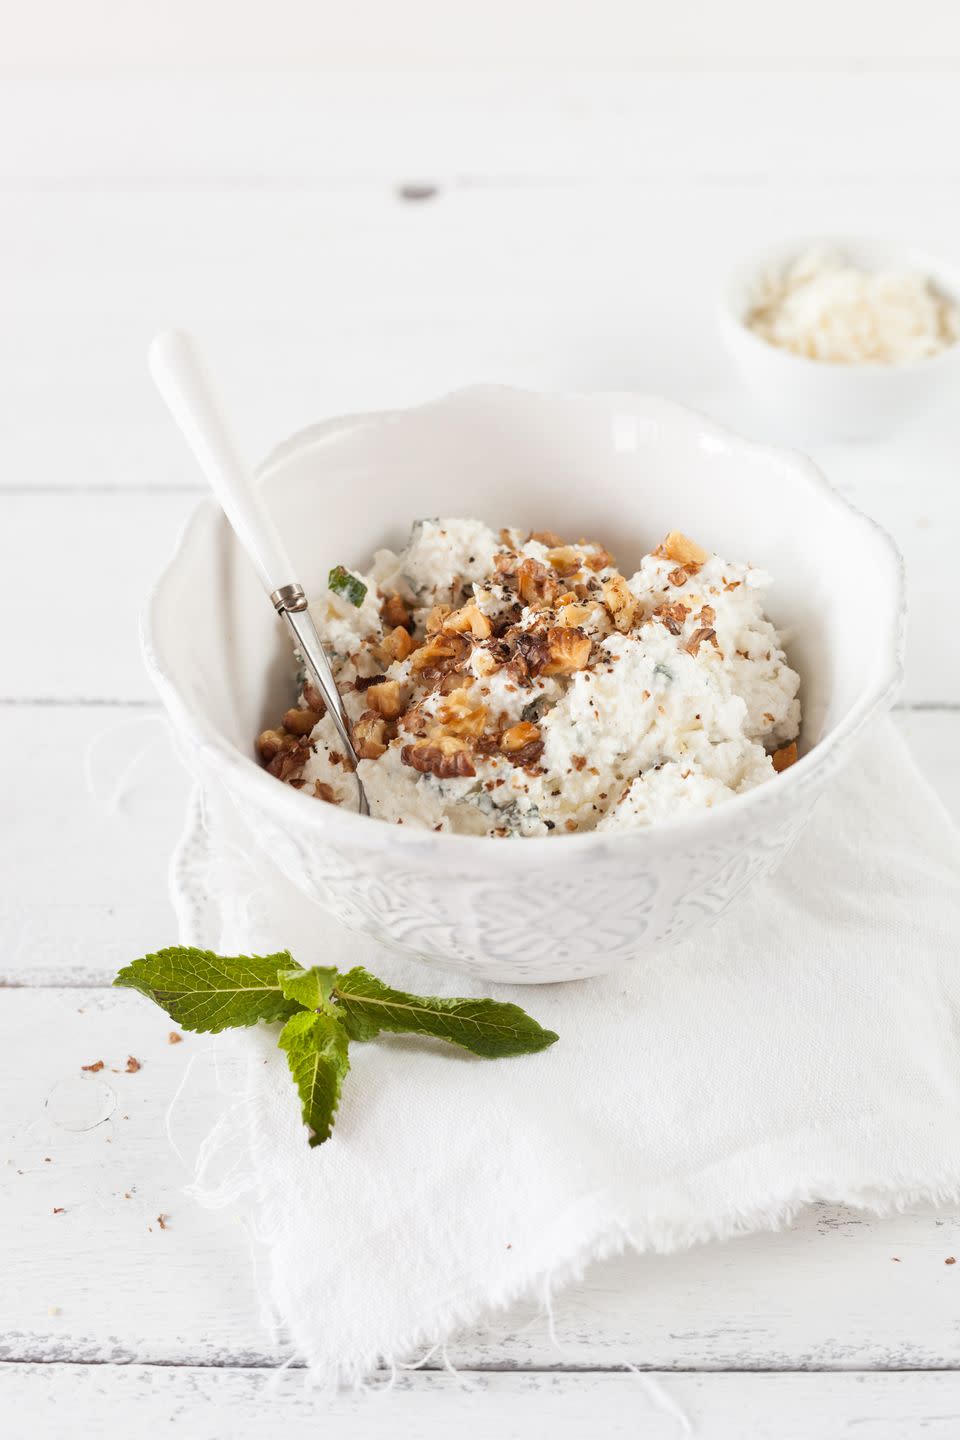 13) Cottage cheese topped with nuts